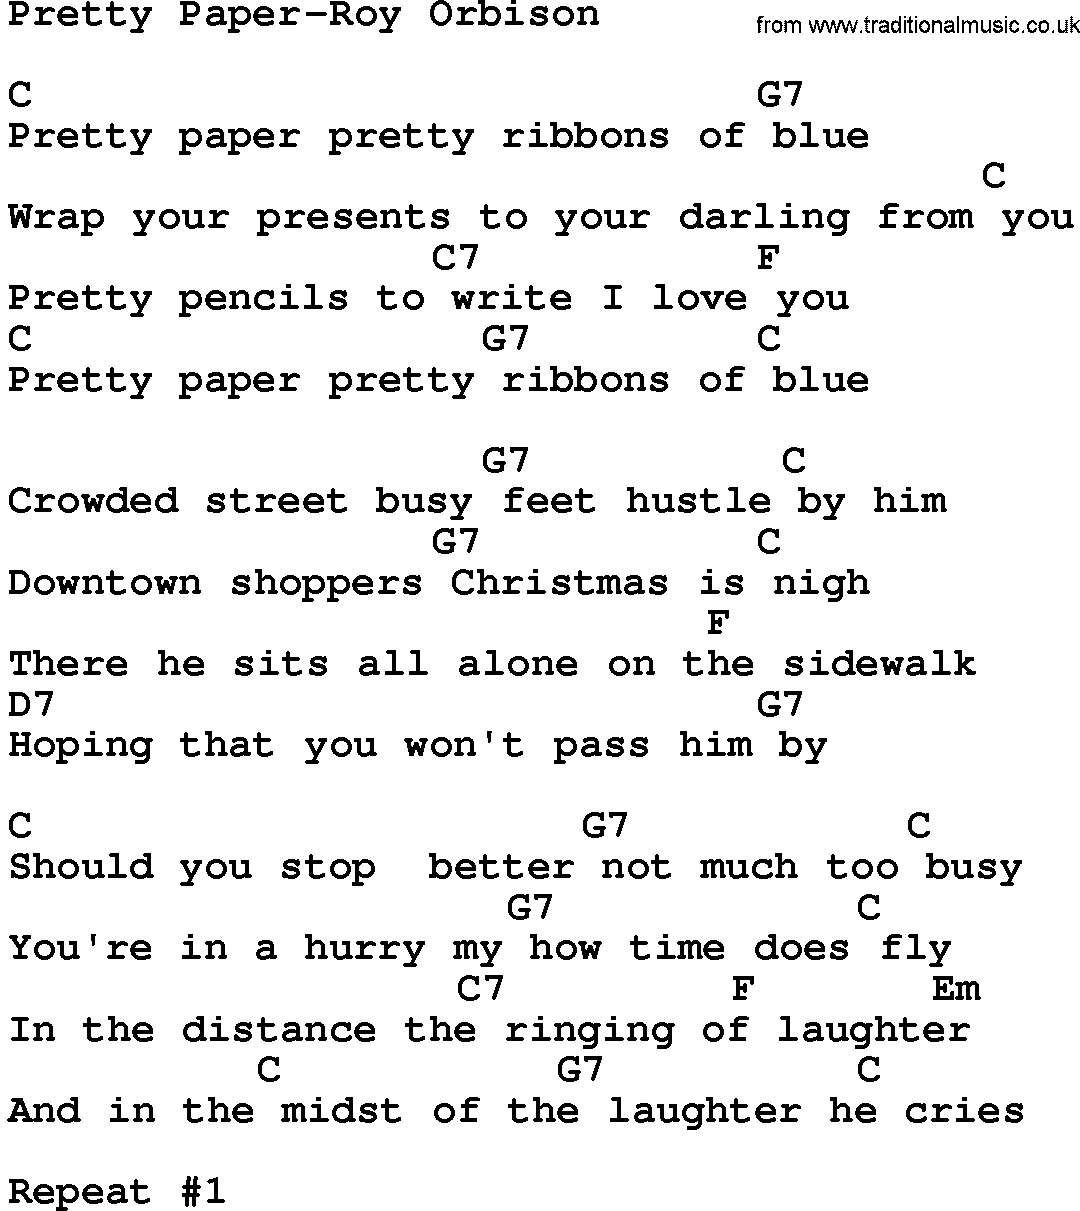 Country music song: Pretty Paper-Roy Orbison  lyrics and chords